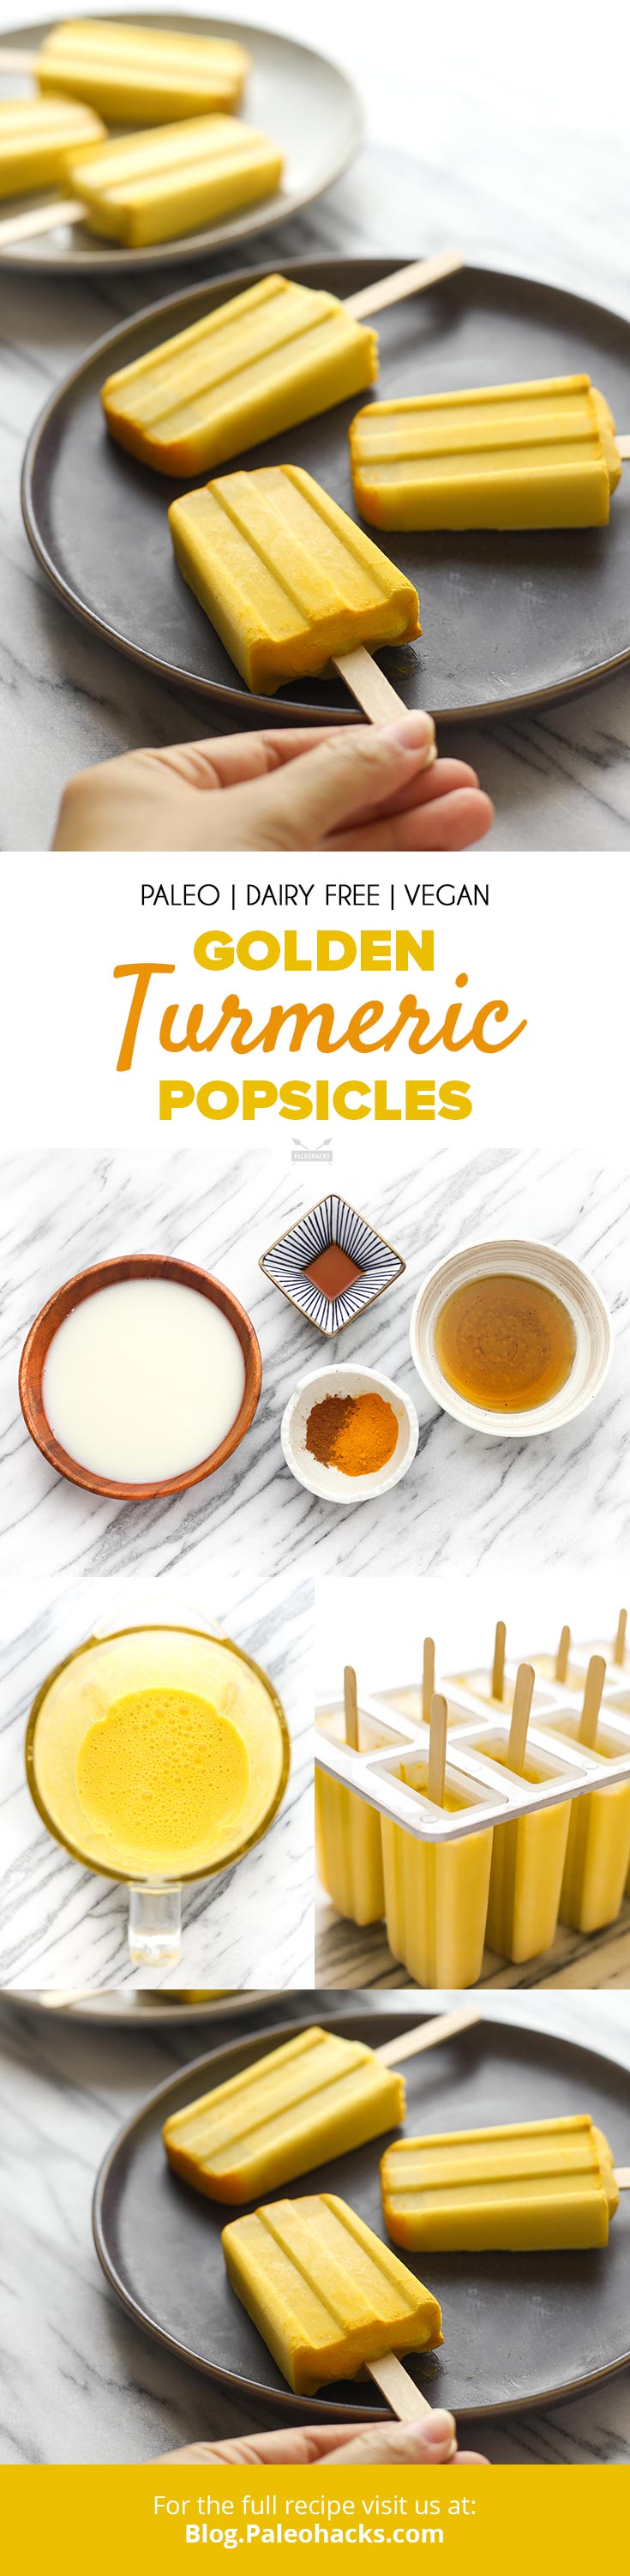 Brighten up your day with Golden Turmeric Popsicles that refresh and heal your gut. It's a win-win for your tastebuds and tummy.